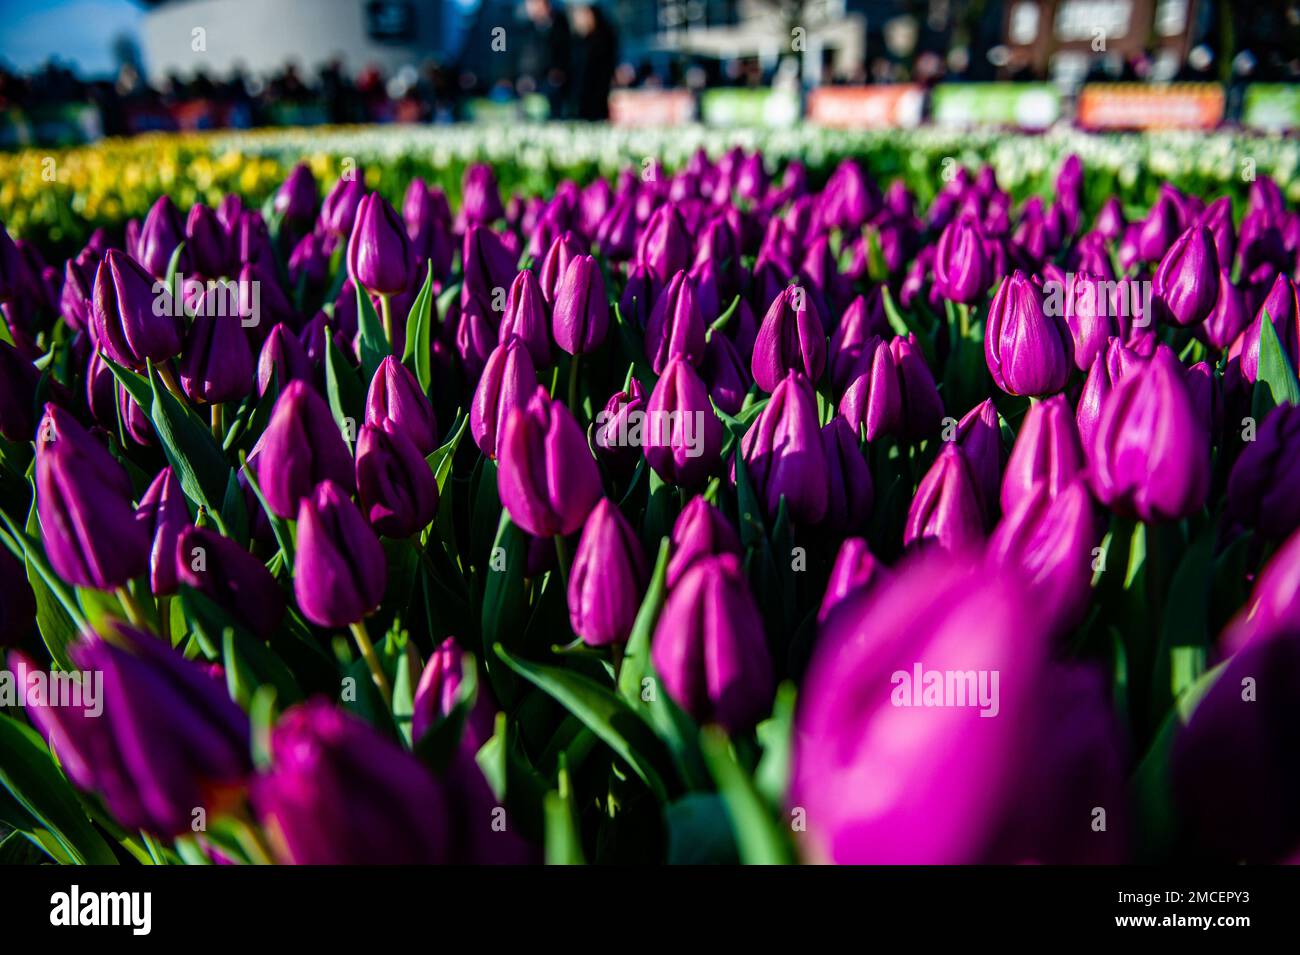 General view of hundreds of purple tulips. Each year on the 3rd Saturday of January, the National Tulip Day is celebrated in Amsterdam. Dutch tulip growers built a huge picking garden with more than 200,000 colorful tulips at the Museumplein in Amsterdam. Visitors are allowed to pick tulips for free. The event was opened by Olympic skating champion, Irene Schouten. Prior to the opening, she christened a new tulip: Tulipa 'Dutch Pearl' as a reference to the world - famous painting 'The girl with a pearl earring' by Johannes Vermeer. Stock Photo